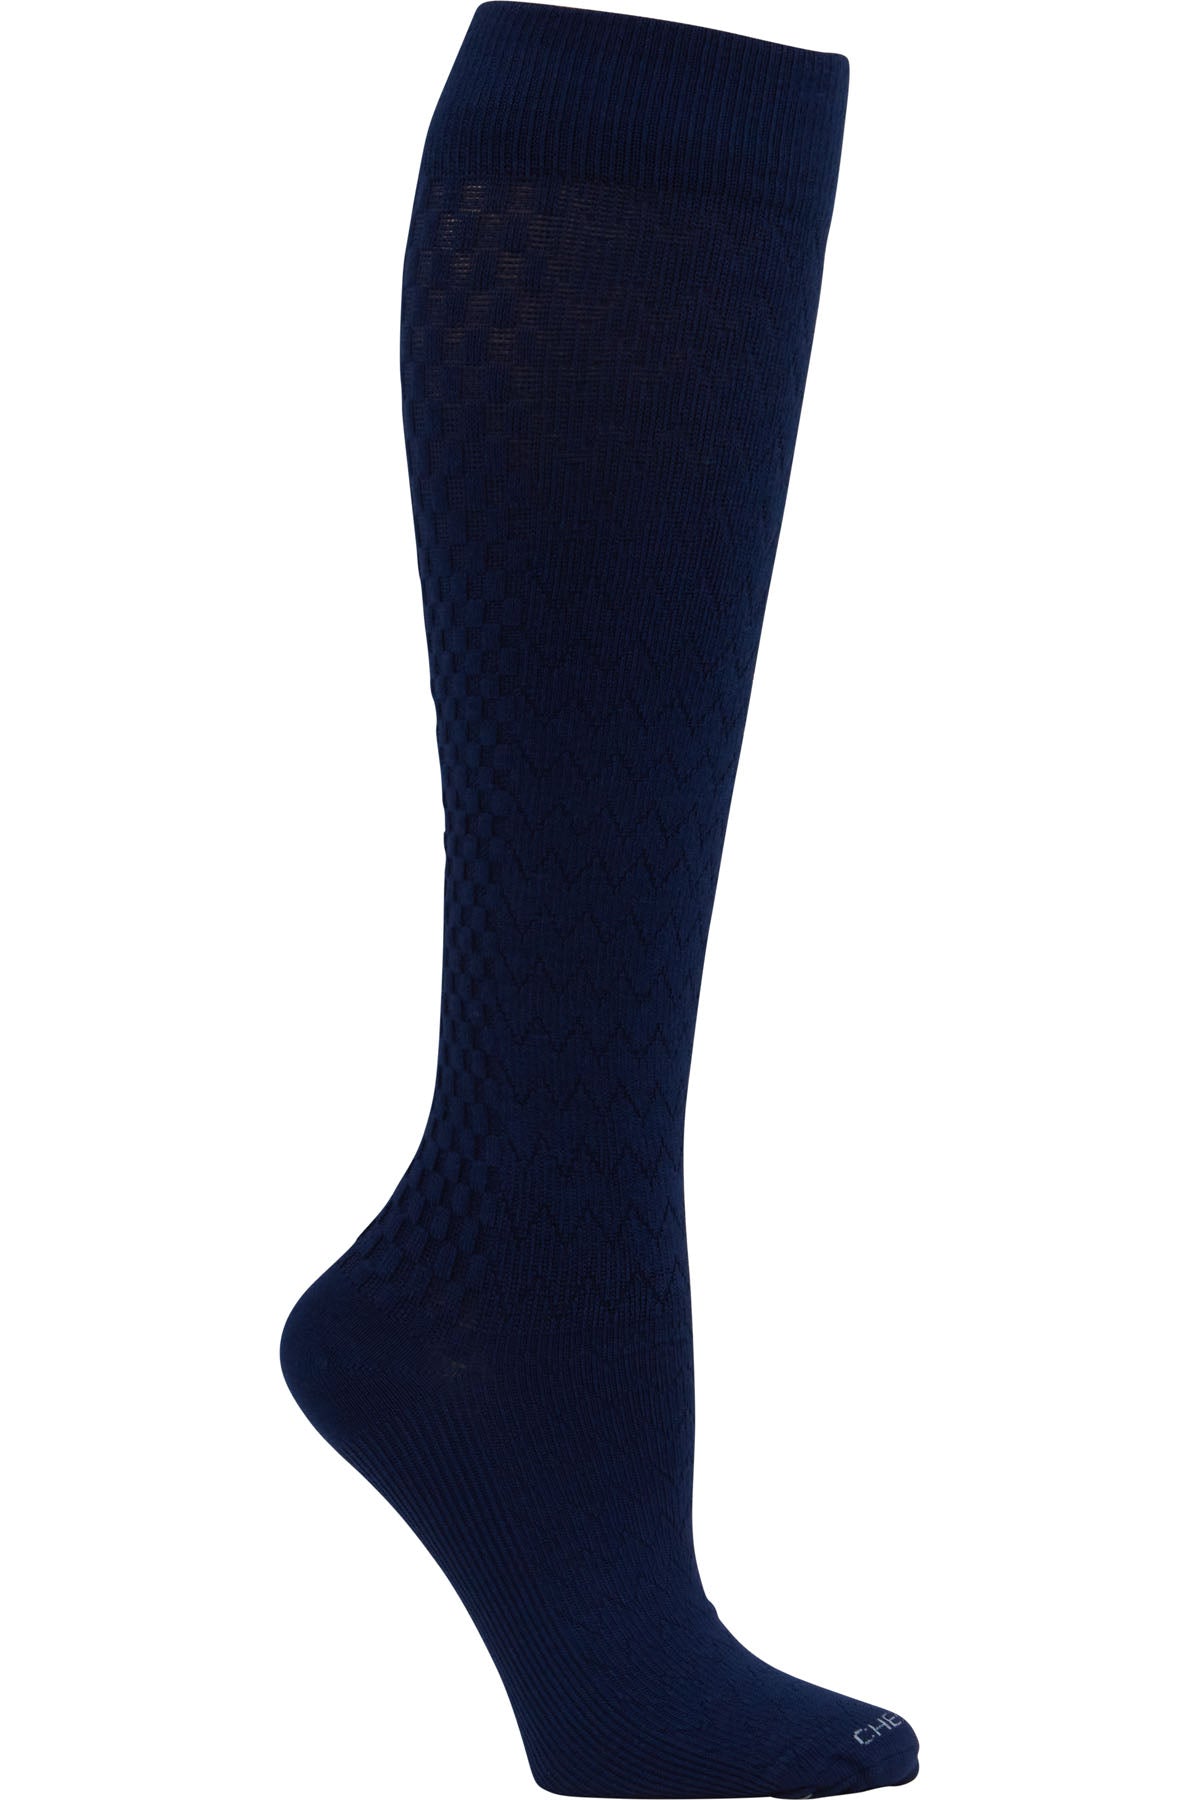 Cherokee Plus Size Mild Compression Wide Calf Socks True Support 10-15 mmHg in Navy at Parker's Clothing and Shoes.